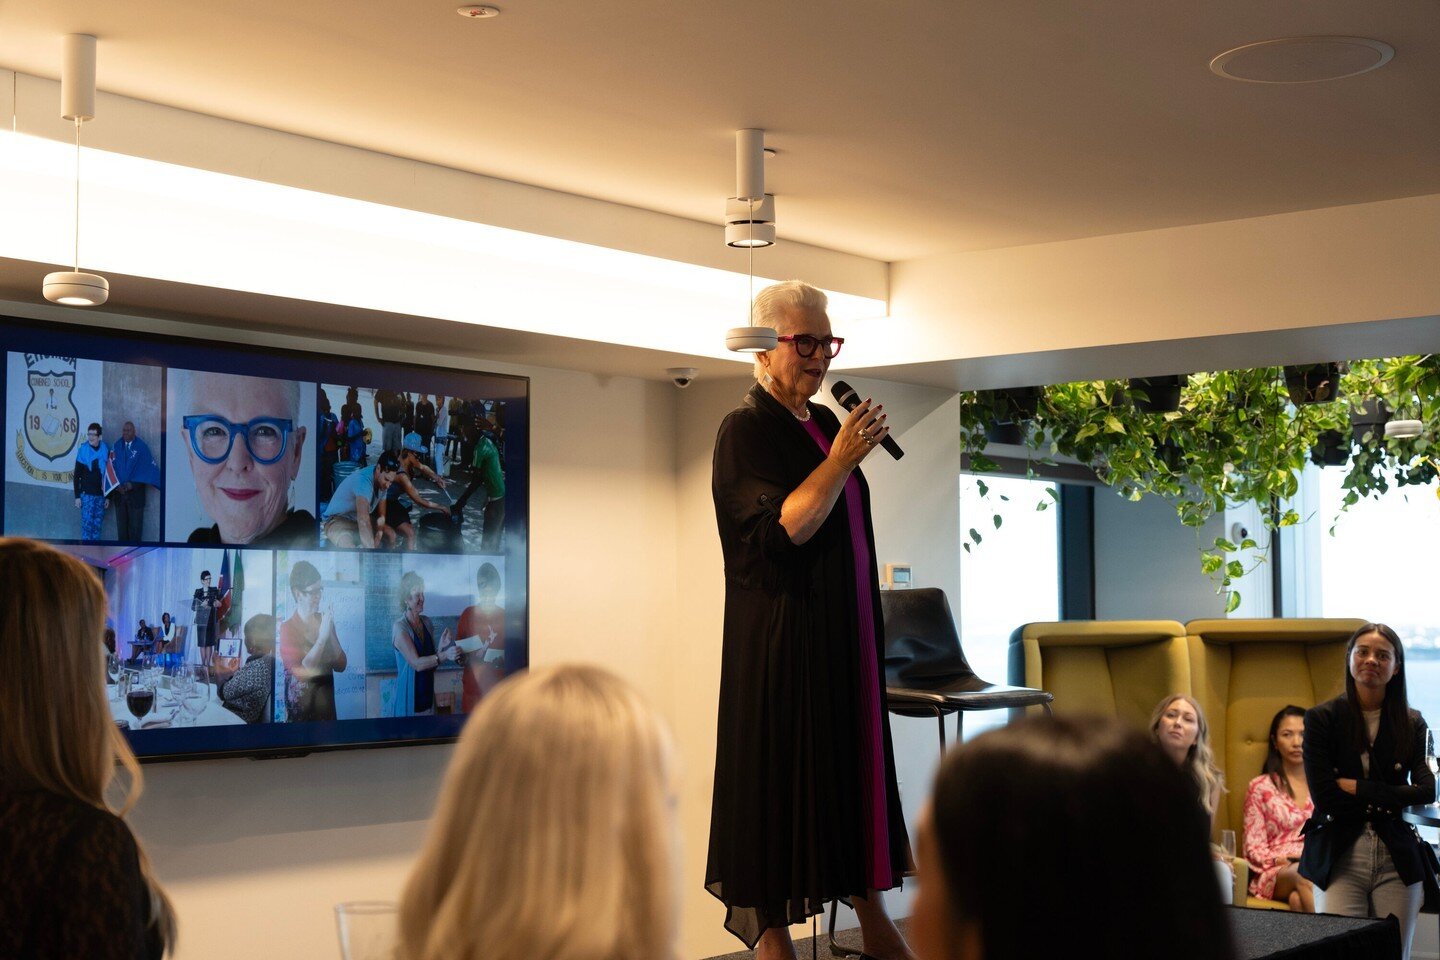 &quot;You don't have to be the smartest person in the room,

You just need to know where the knowledge is and keep searching it out.&quot;

The great Jenny Shipley said this to a room full of women interested in property

And I couldn't agree more.

